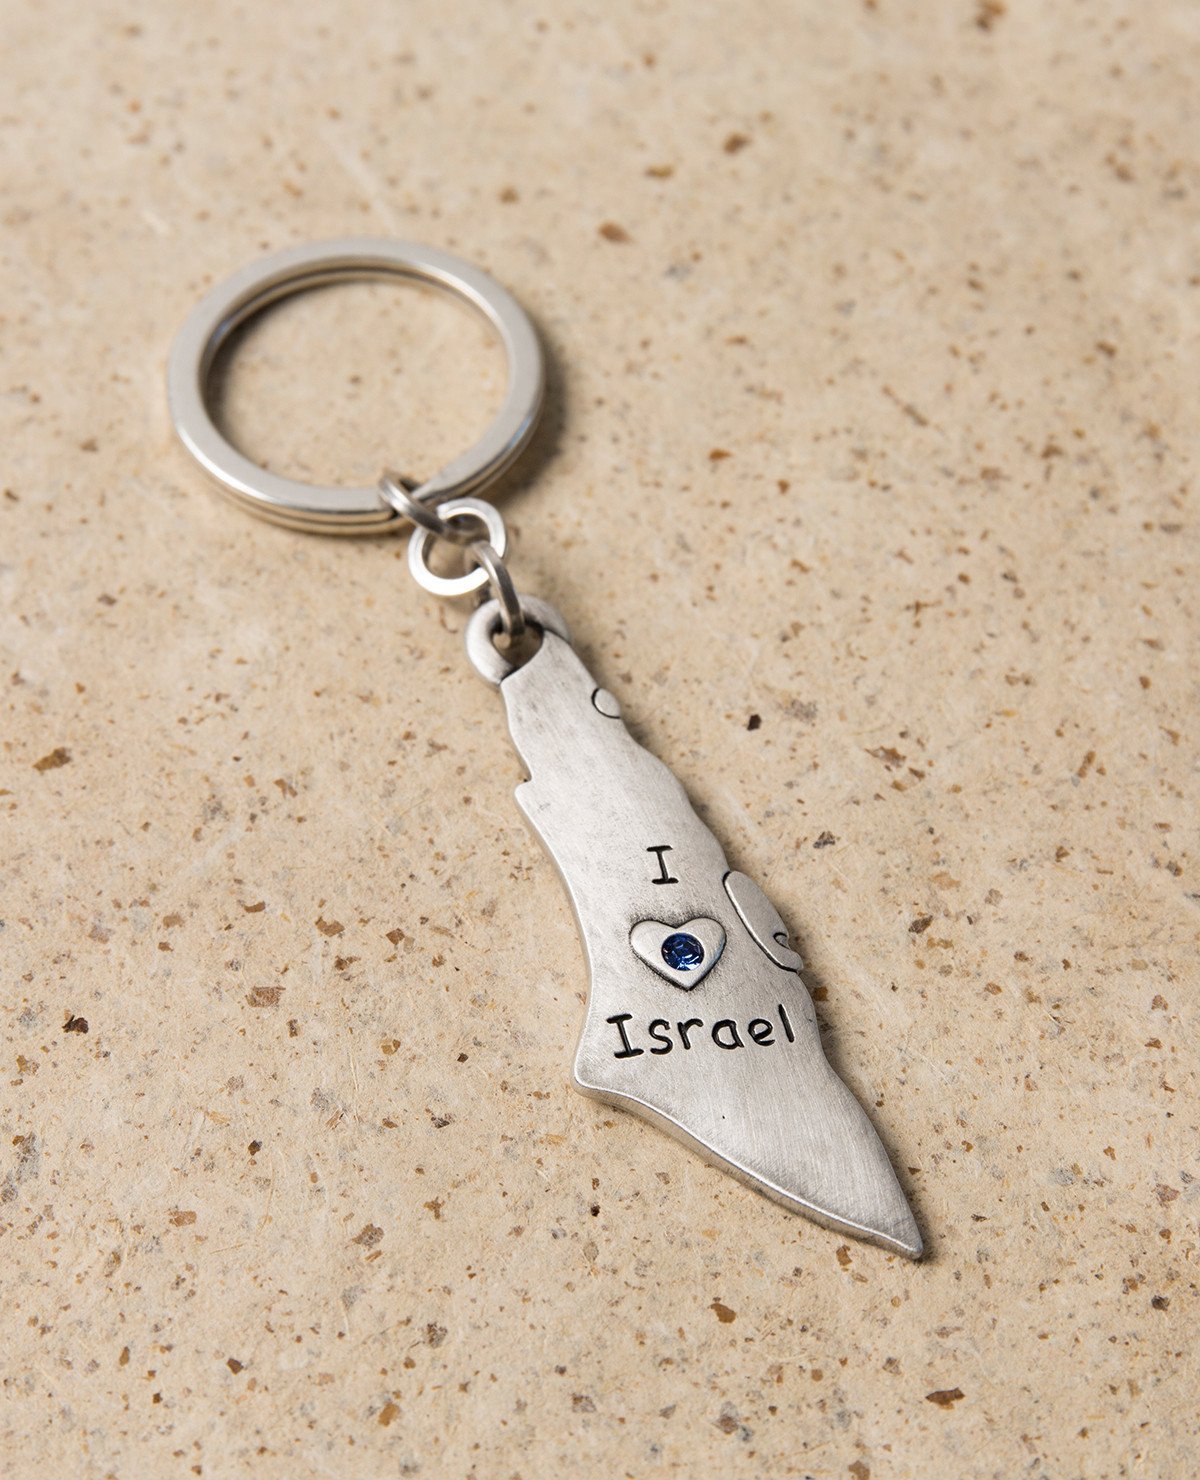 A charming keychain for Israel lovers, in English and designed in the shape of a map of Israel. Engraved on one side are the words "I Love Israel" with a heart embedded with blue colored Swarovski crystals, and on the other side a flag of Israel. The keychain is coated in sterling silver and is strong and reliable. This reminder of the simple love for Israel makes a great gift for friends and family in Israel and abroad.   Length: 7 cm  Width: 2 cm